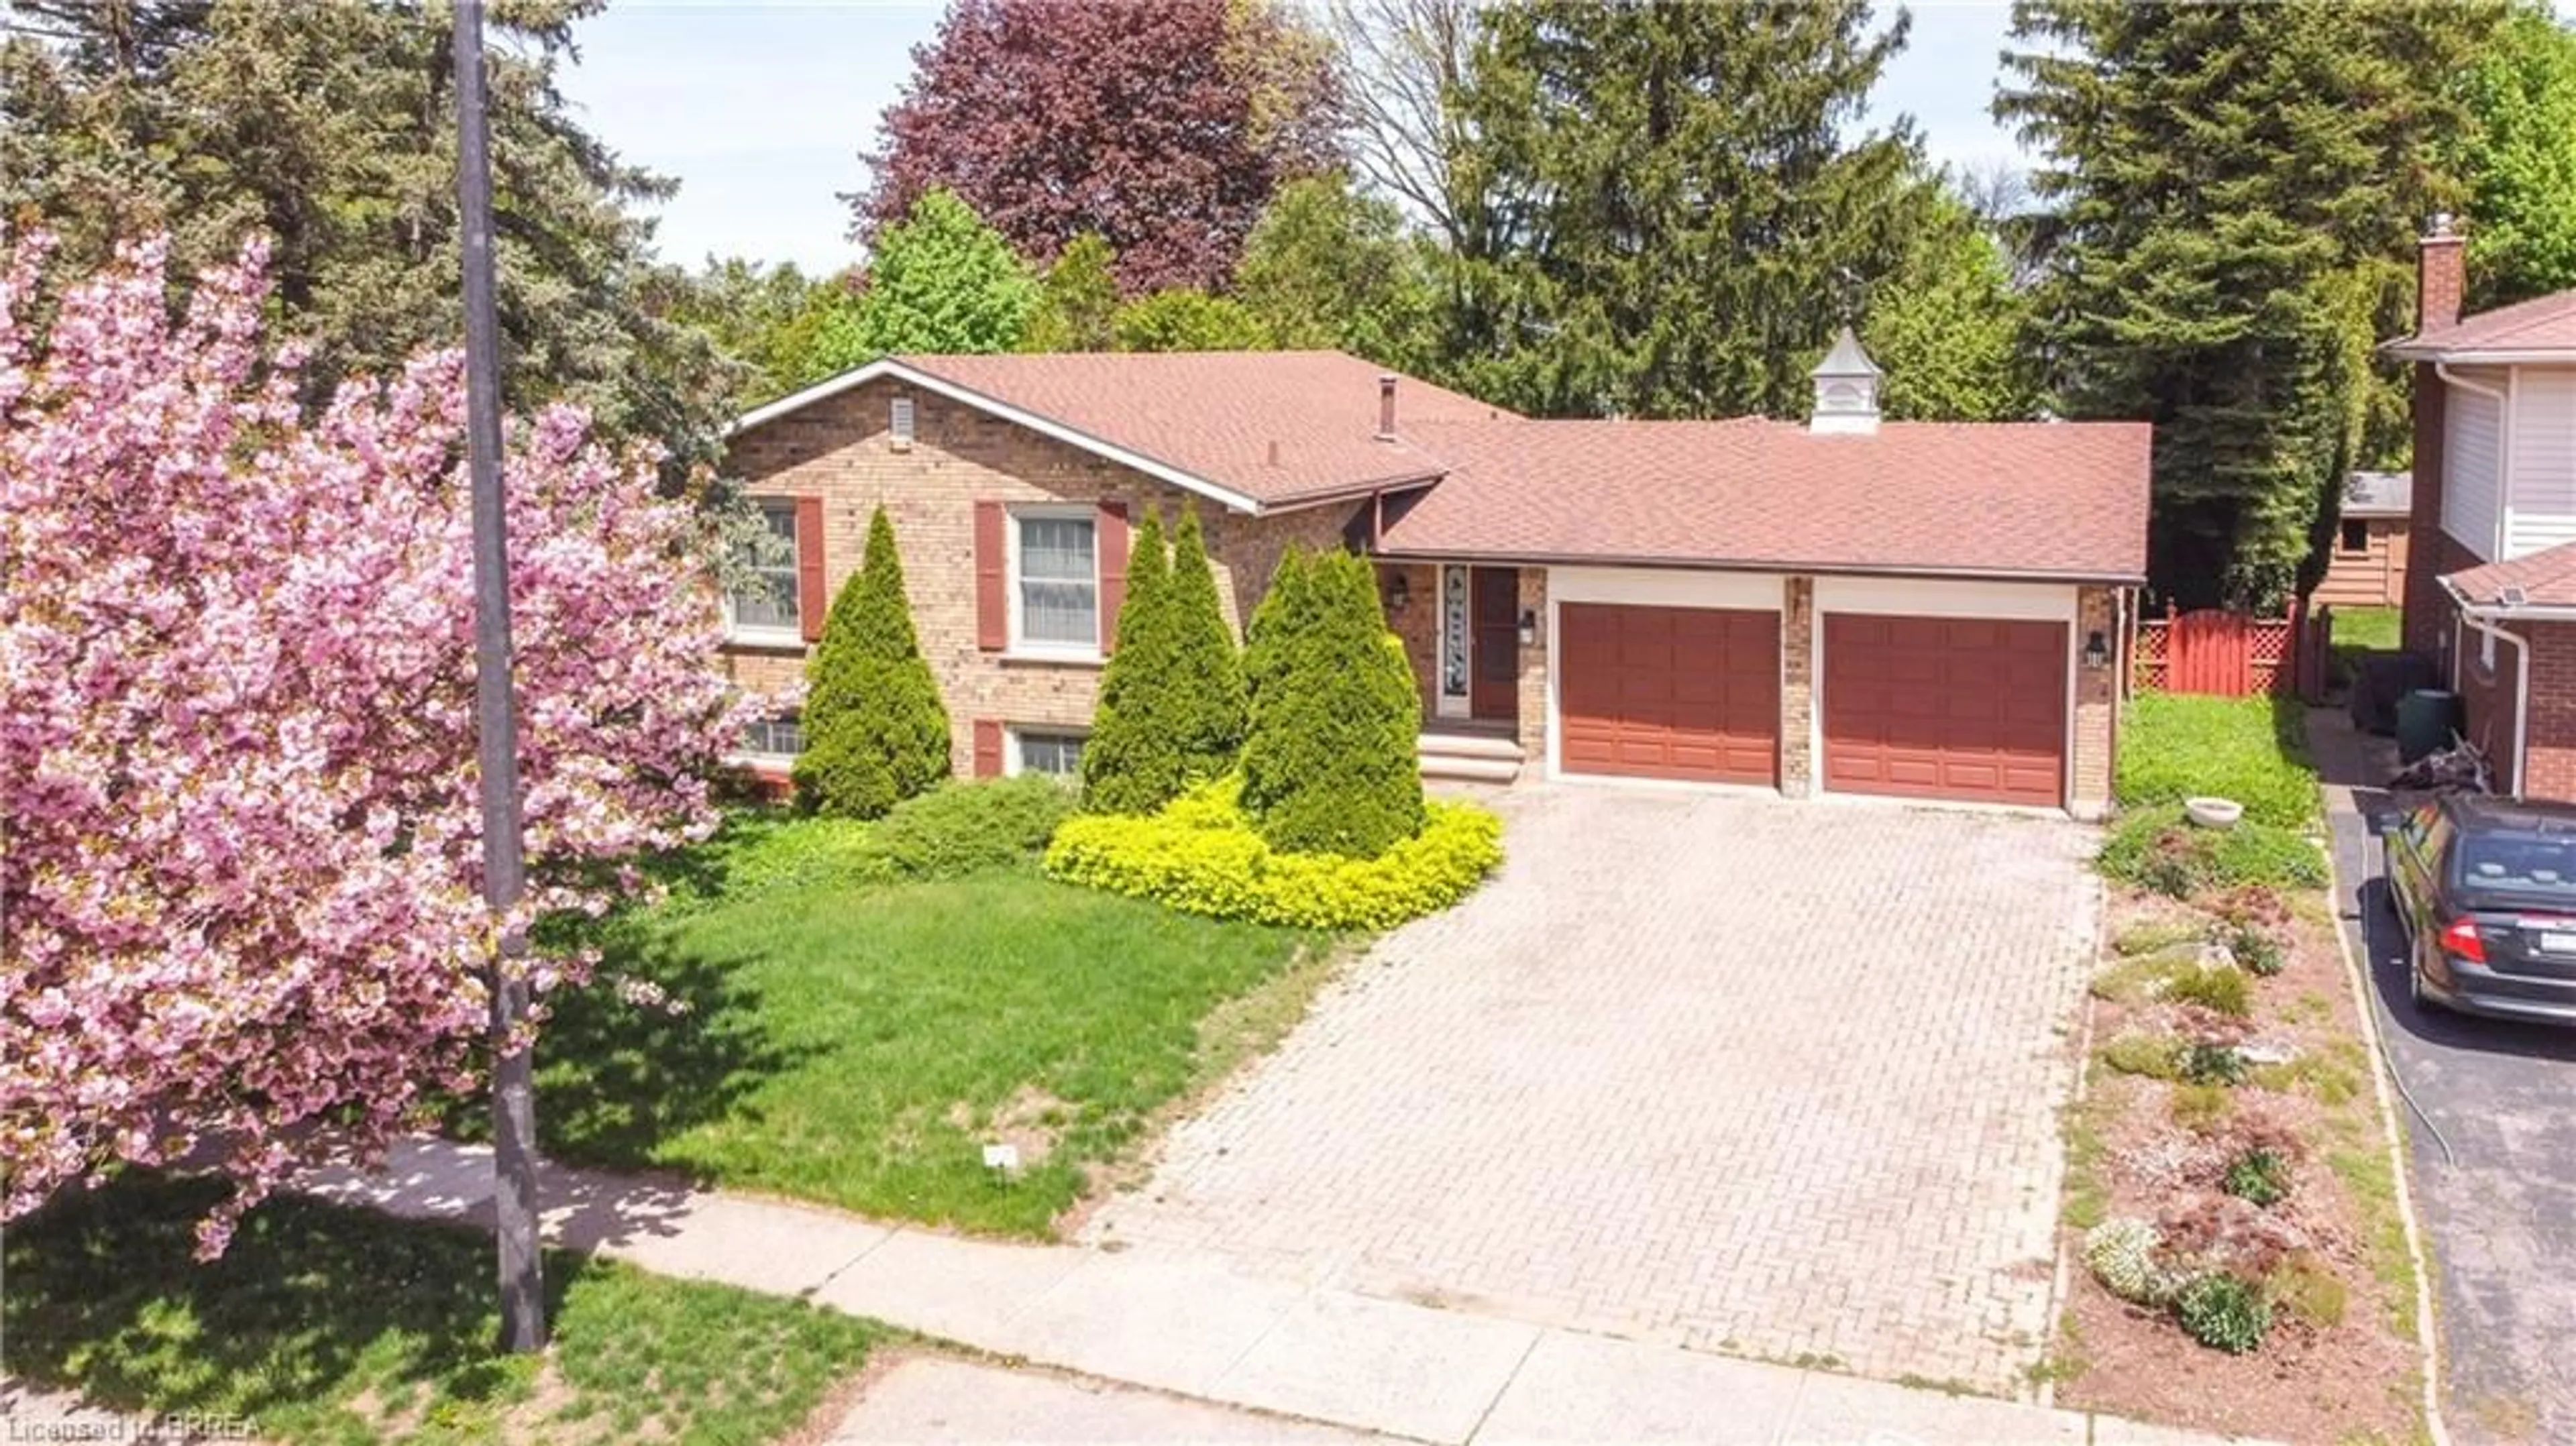 Home with brick exterior material for 34 Westbrier Knoll, Brantford Ontario N3R 5W1